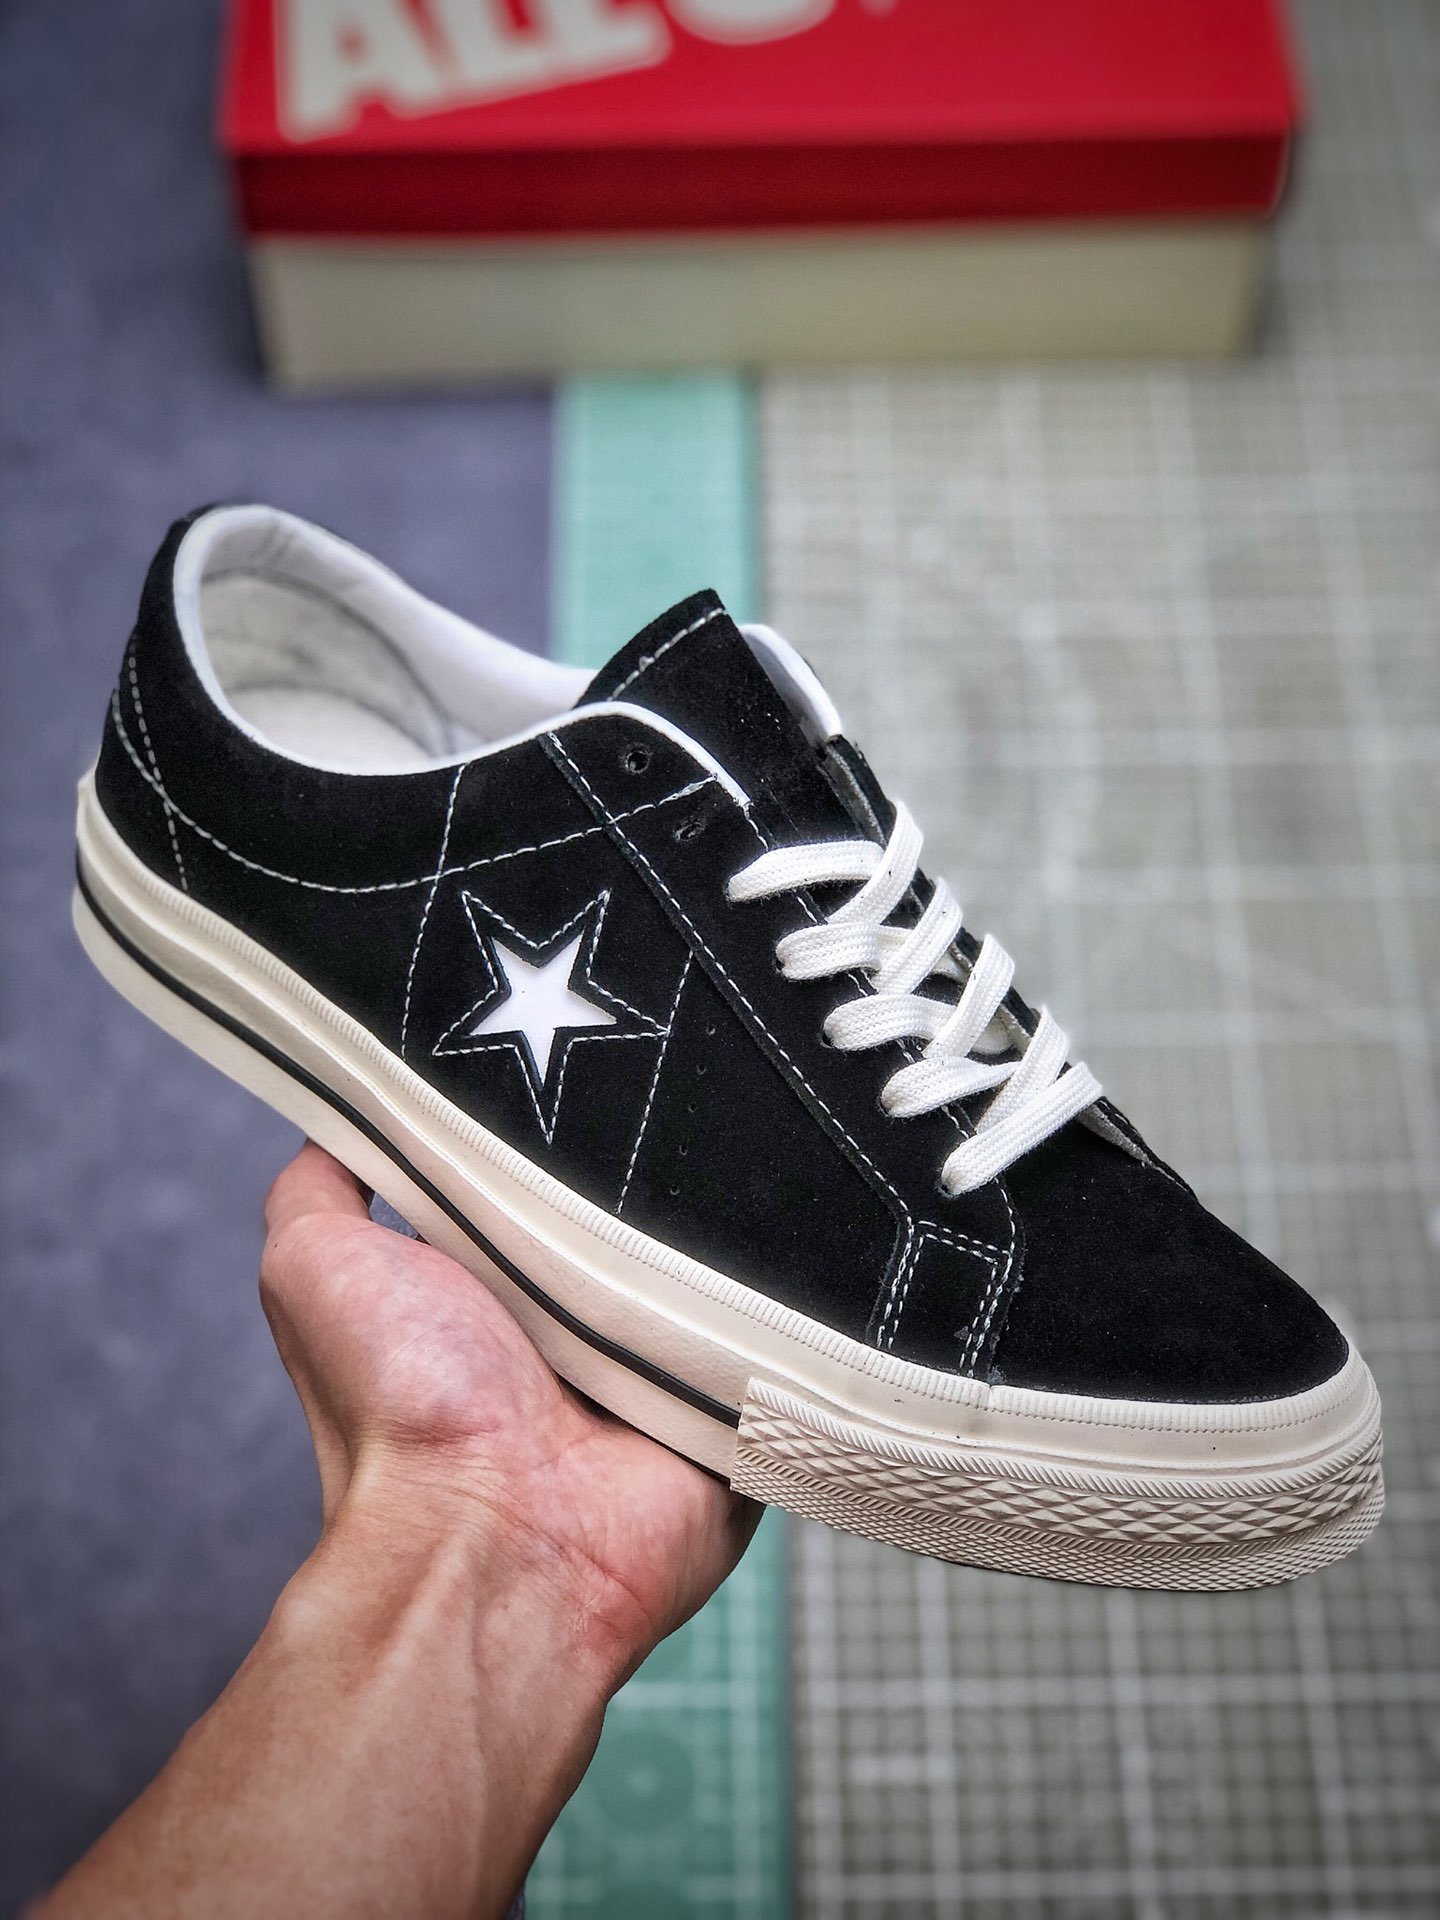 Converse One Star J Made In Japan Sports Shoes Joint Name Shoes For Men Amd Women Popular Authentic Lazada Co Th